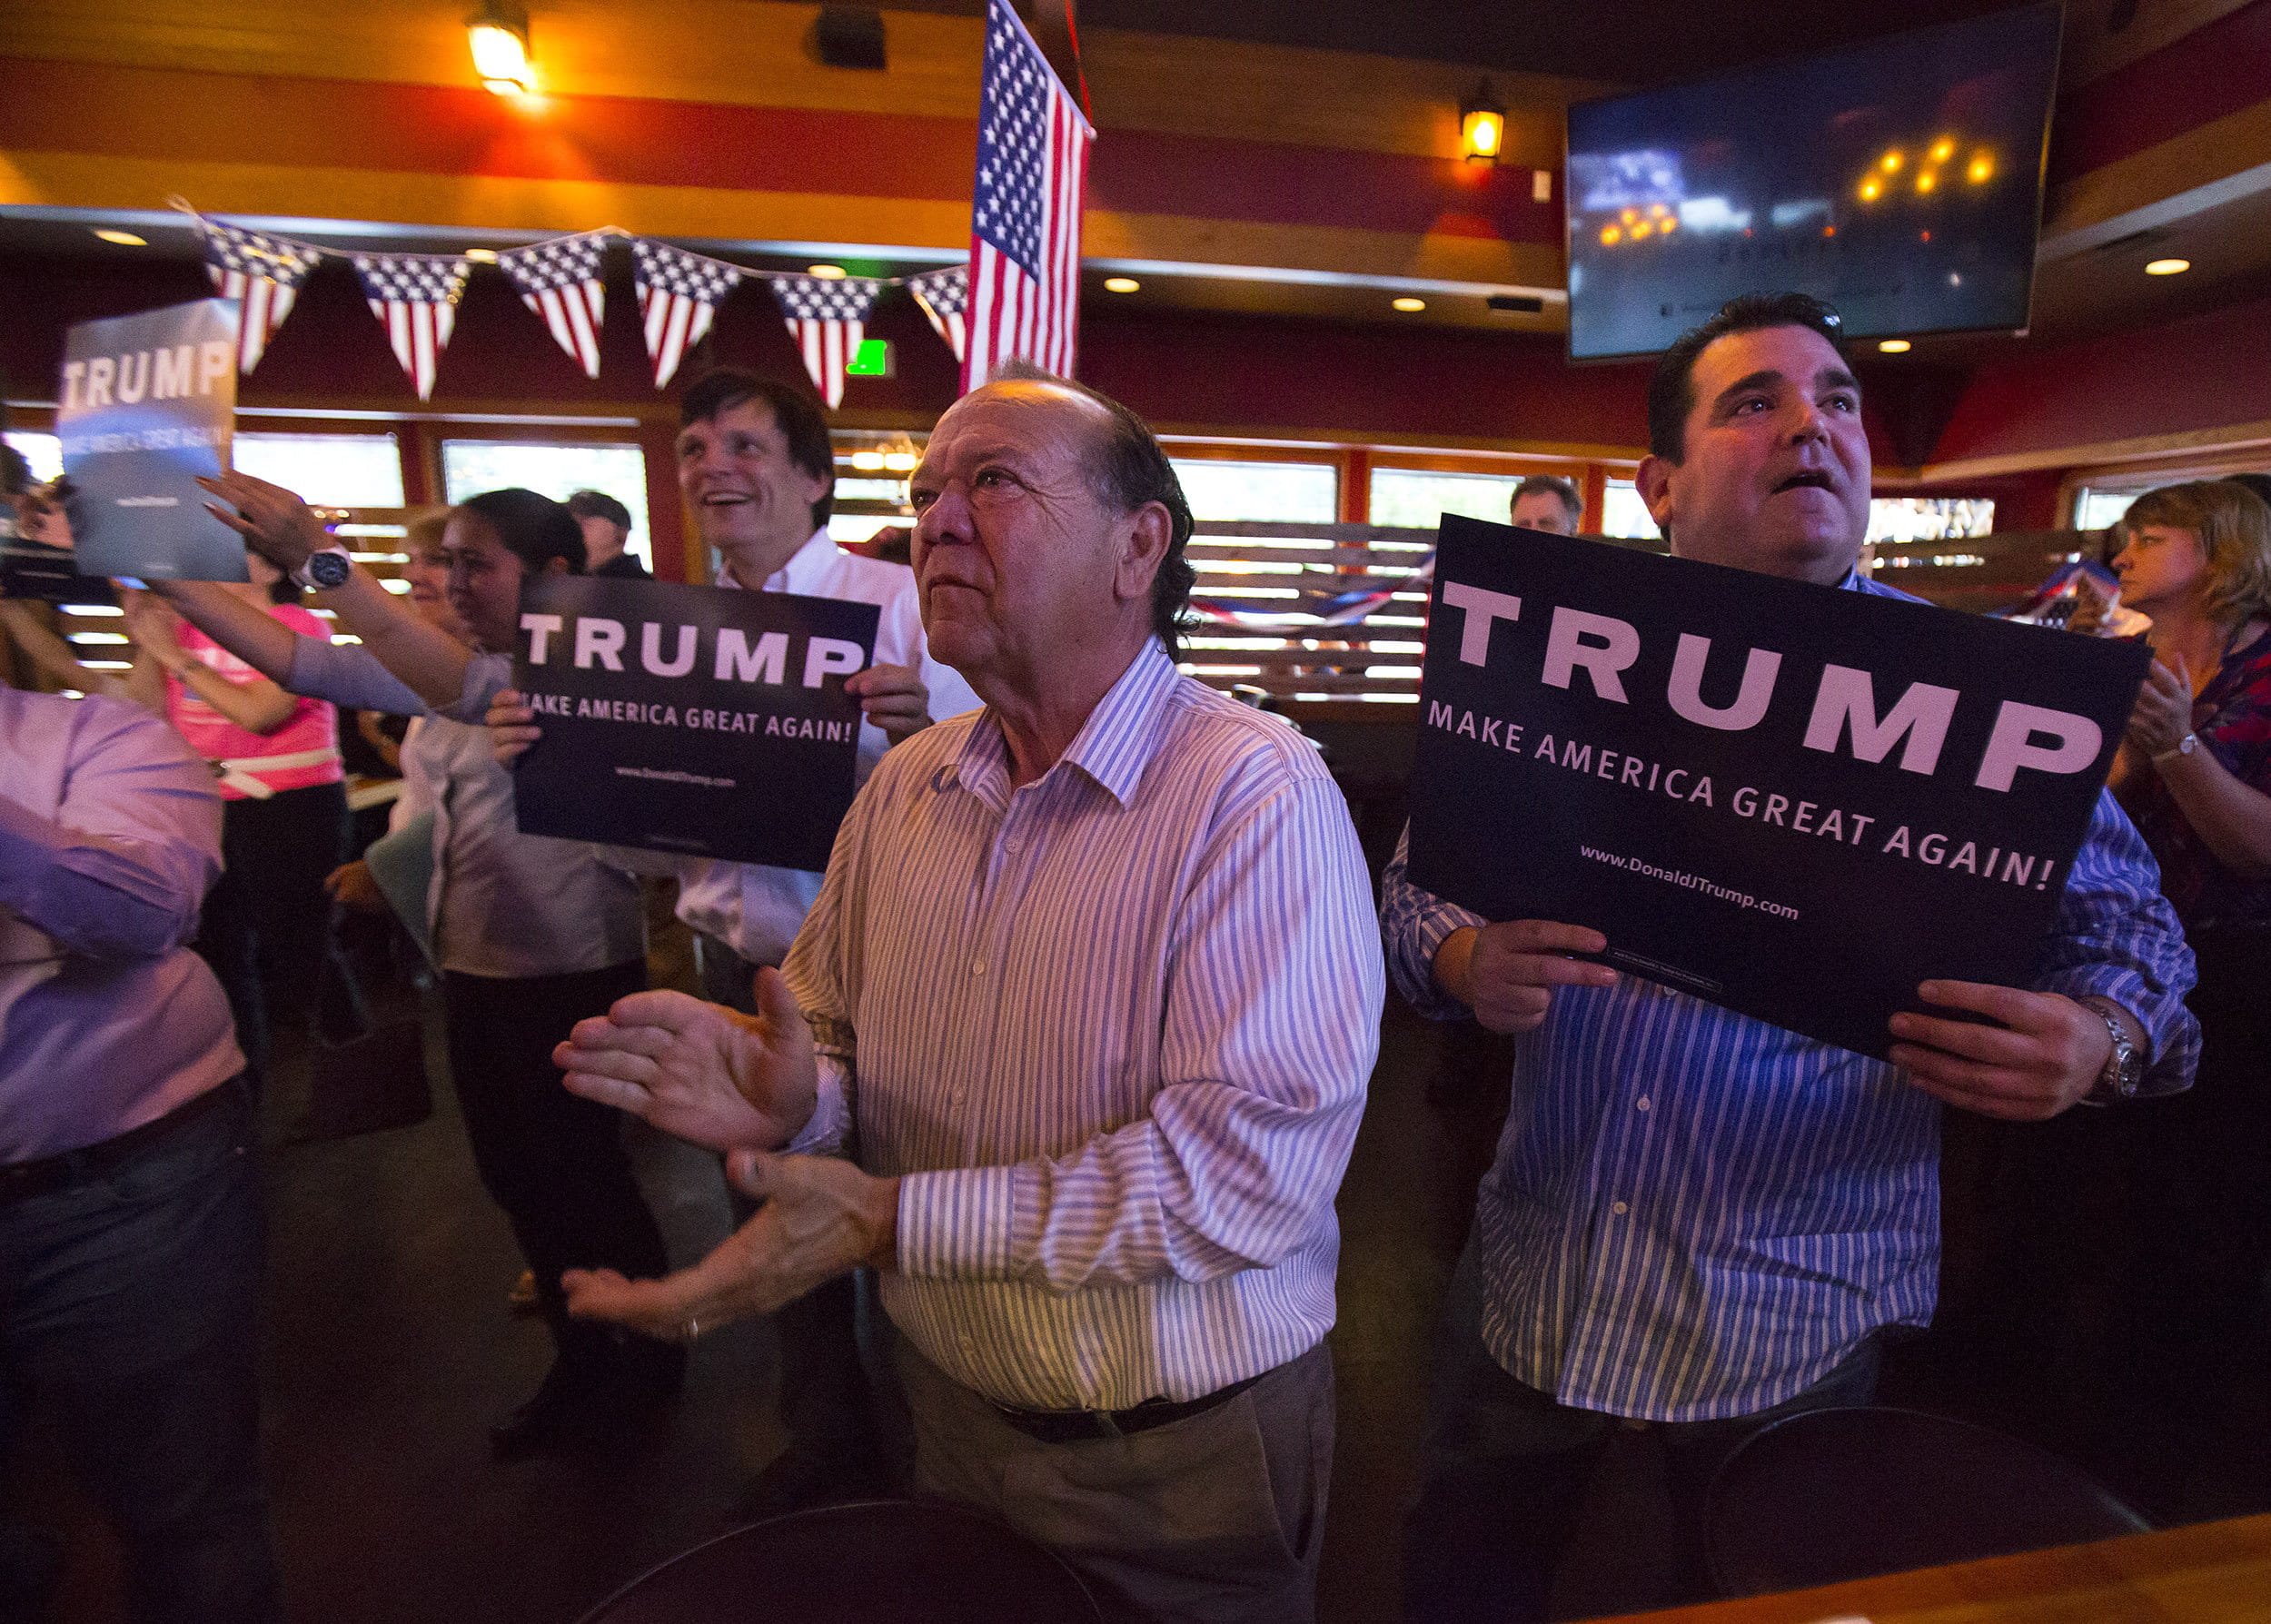 Cle Elum resident Sno Benavides, center, celebrates early Washington primary results showing a wide-margin victory for Republican presidential candidate Donald Trump at Cask and Trotter, Tuesday, May 24, 2016, in Lynwood, Wash.  Standing to the right of Sno is his nephew Chente Benavides.